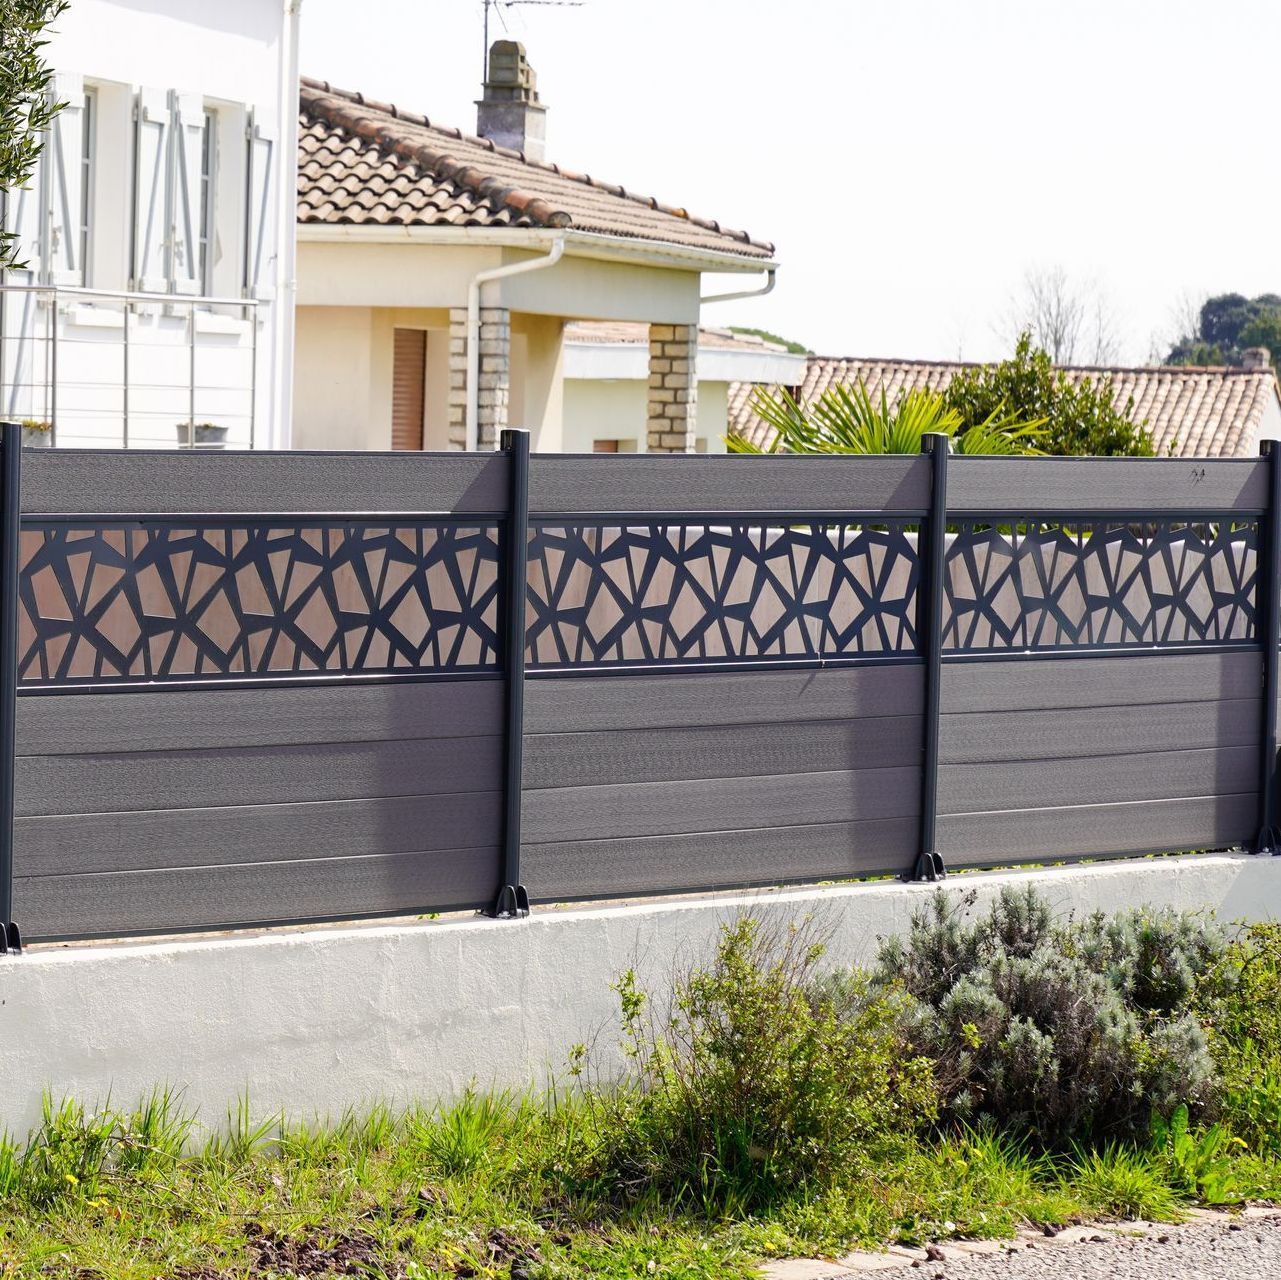 A fence with a pattern on it is in front of a house.